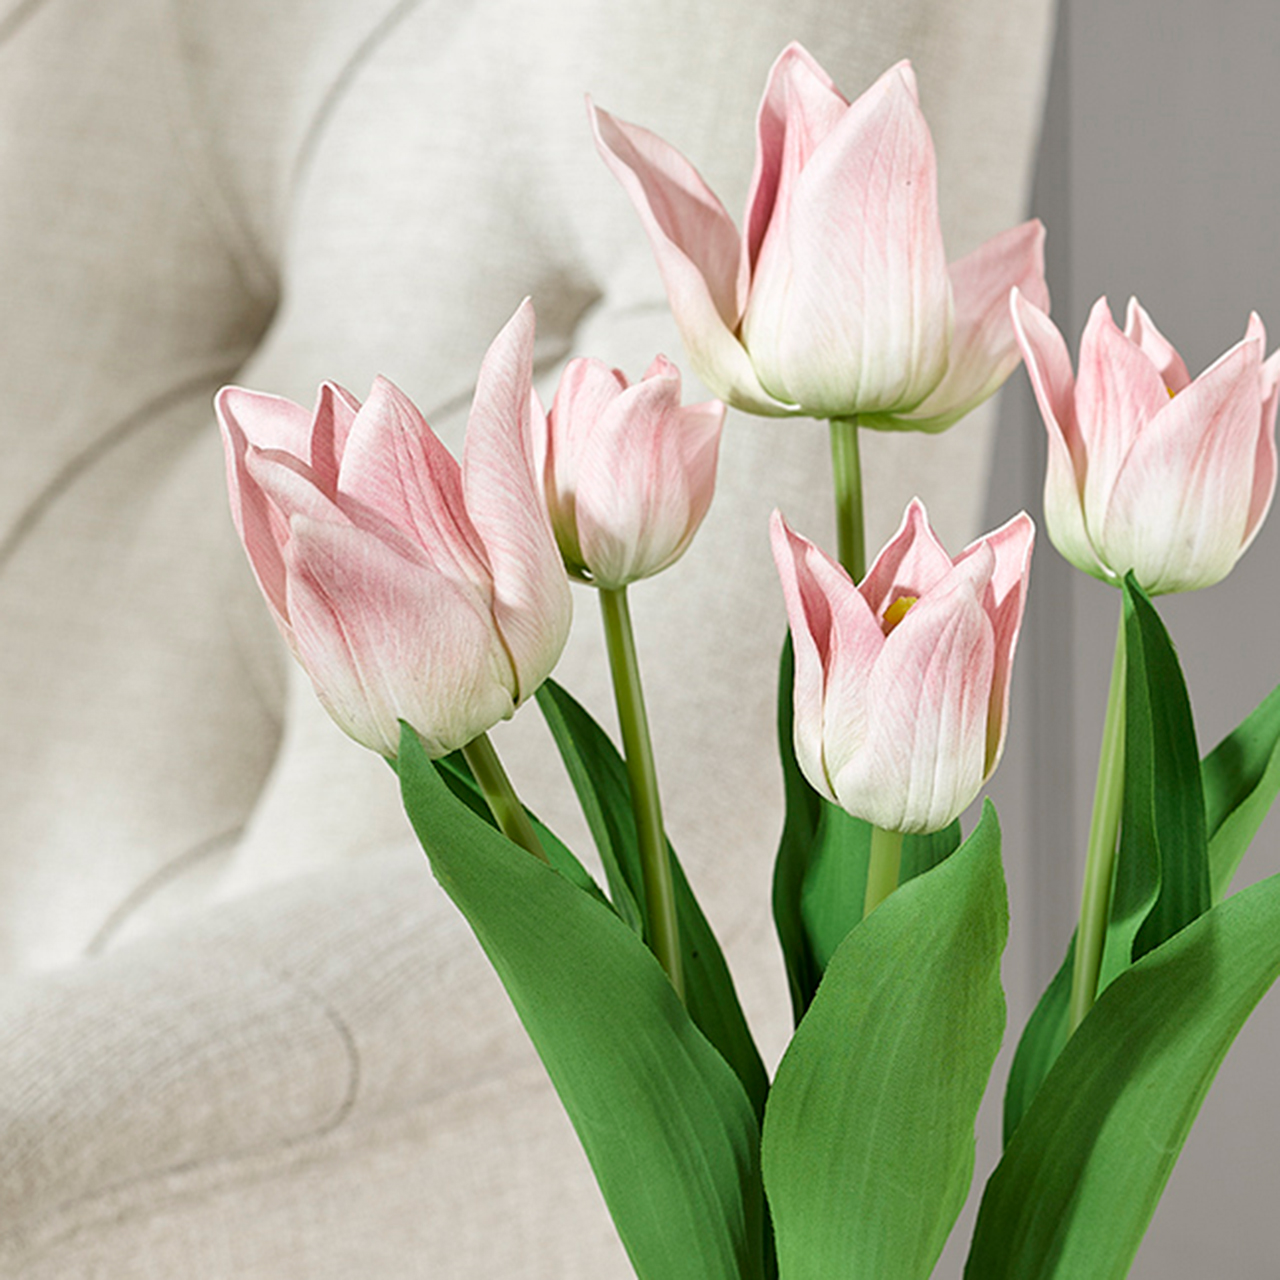 Pale Pink Tulips in Cement Pot